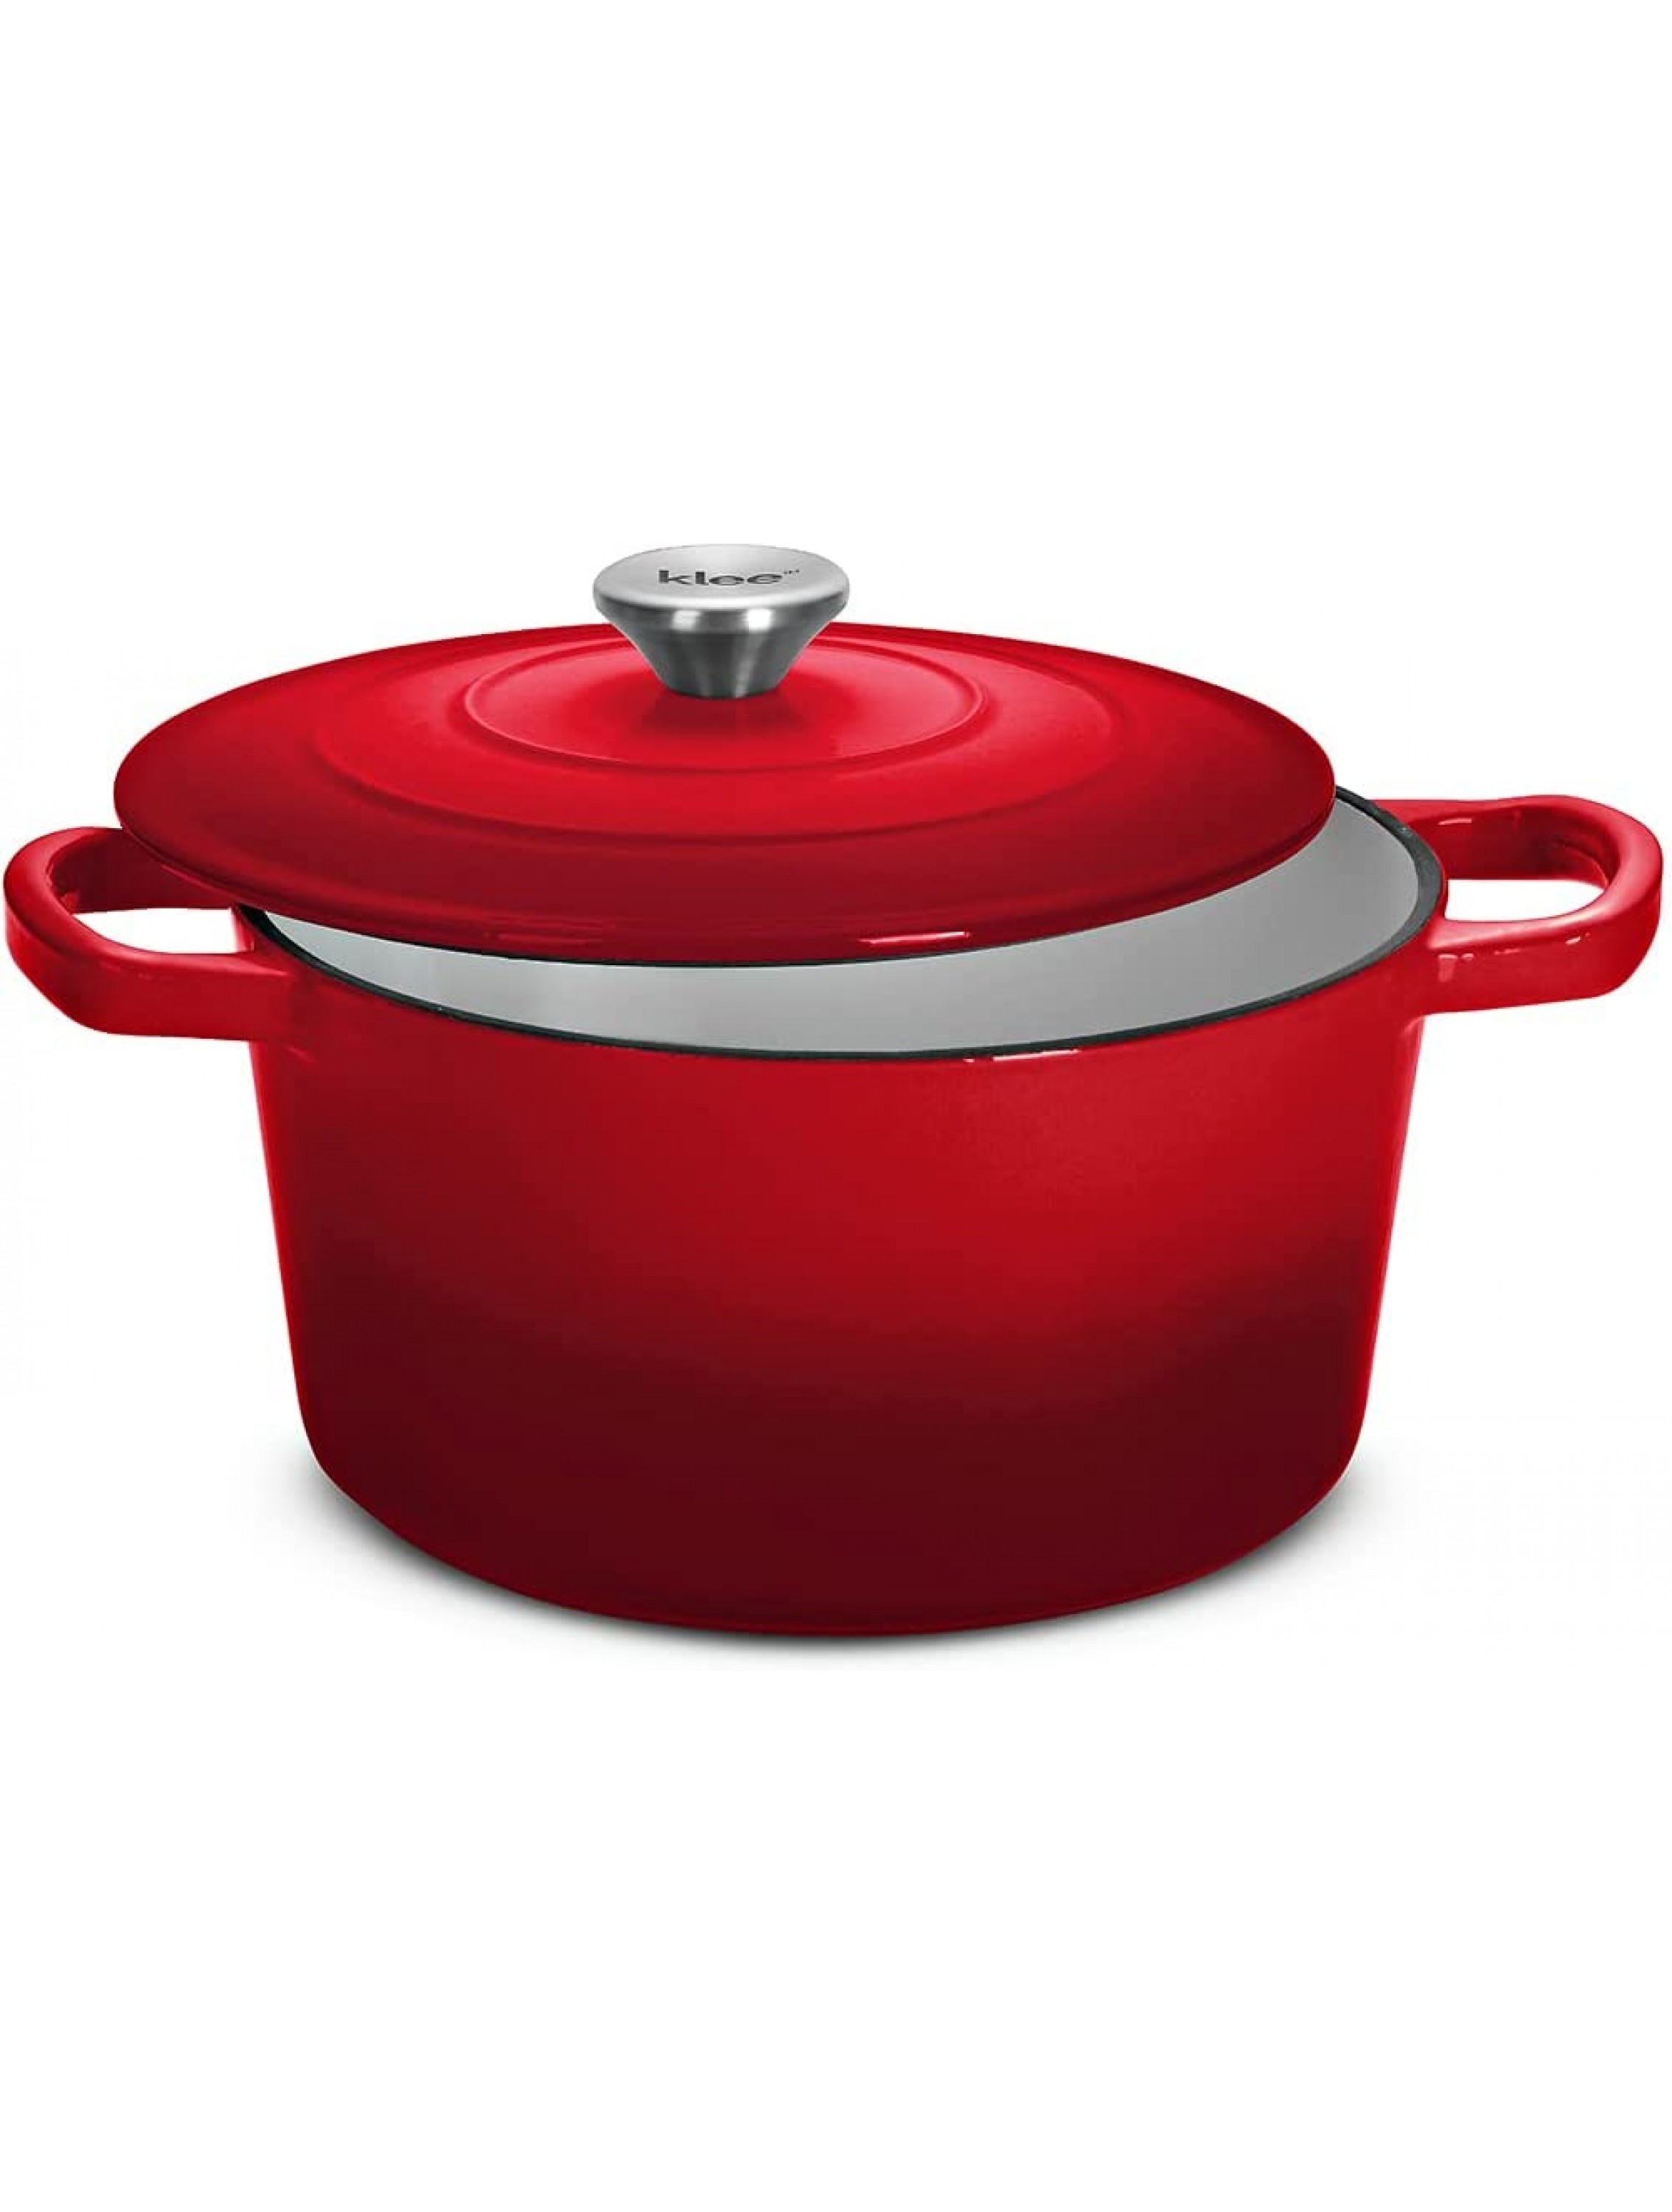 Klee 4-Quart Dutch Oven Pot with Self-Basting Lid Red Heavy-Duty Enameled Cast Iron Dutch Oven Casserole Dish for Braising Broiling Baking Frying and More Oven-Safe Up To 500°F - BXGLZYBB8